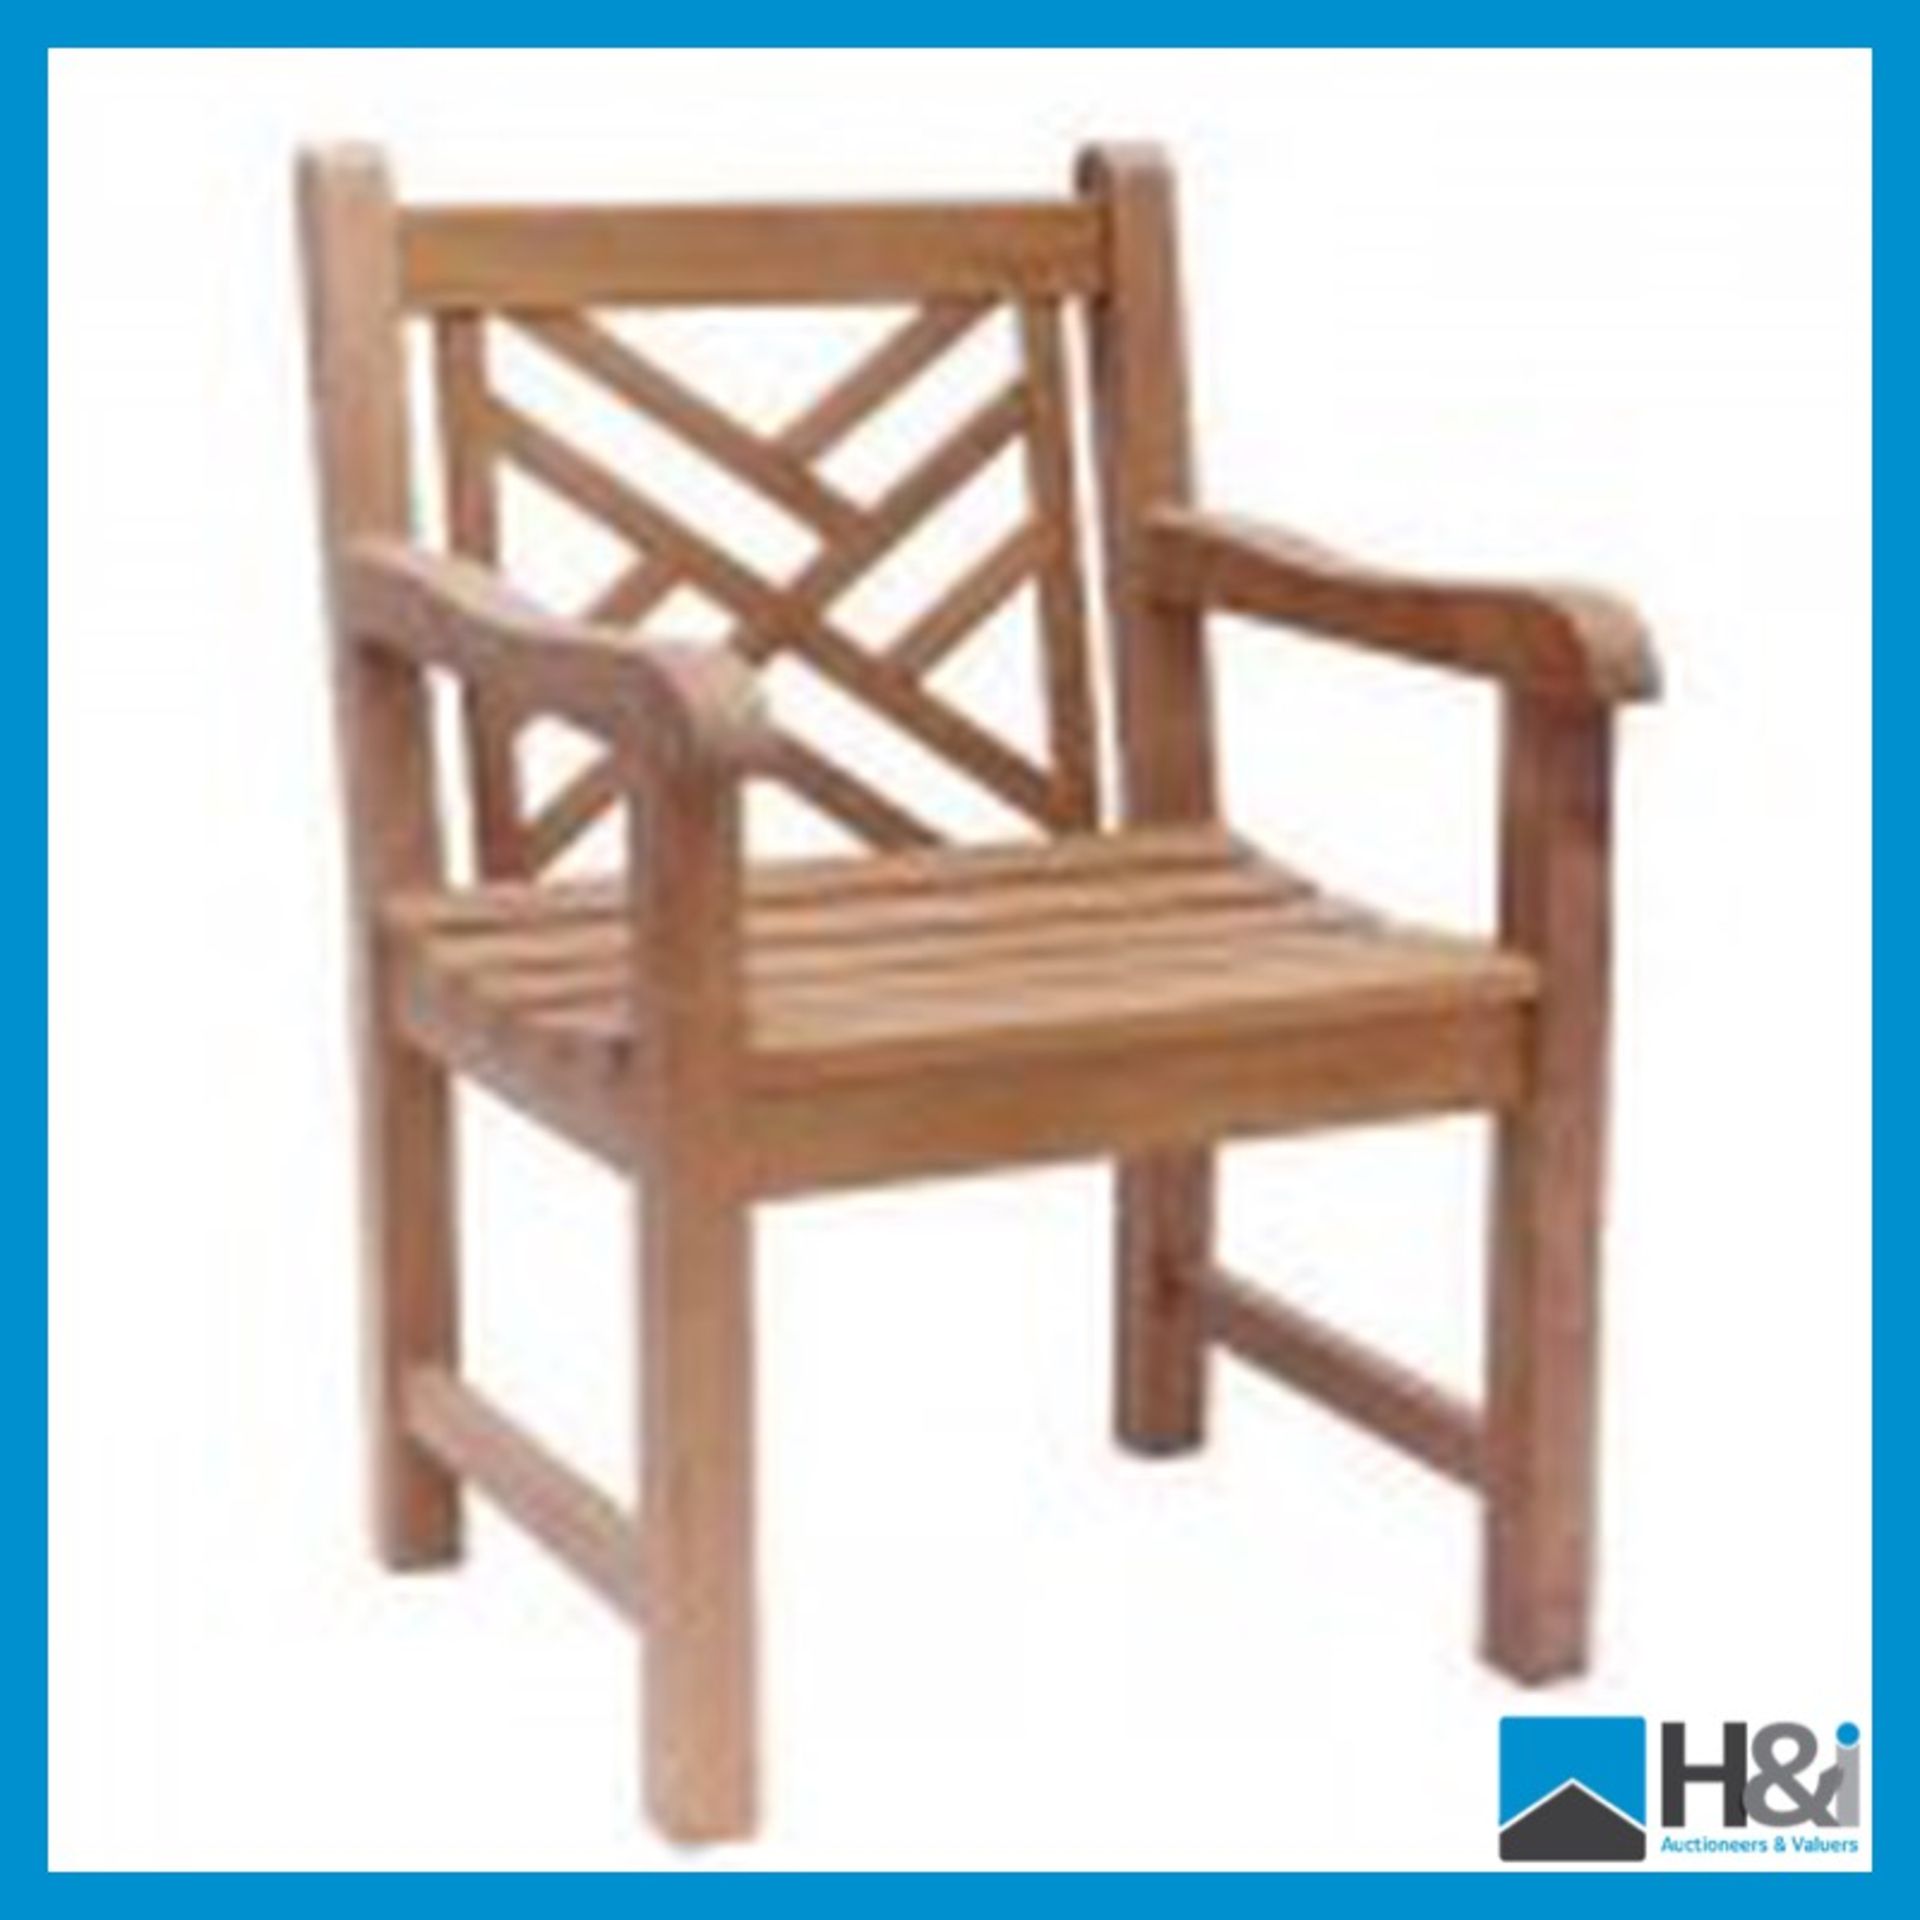 Cross Back Garden Chair. With its beautiful cross back design this chair is very comfortable. The